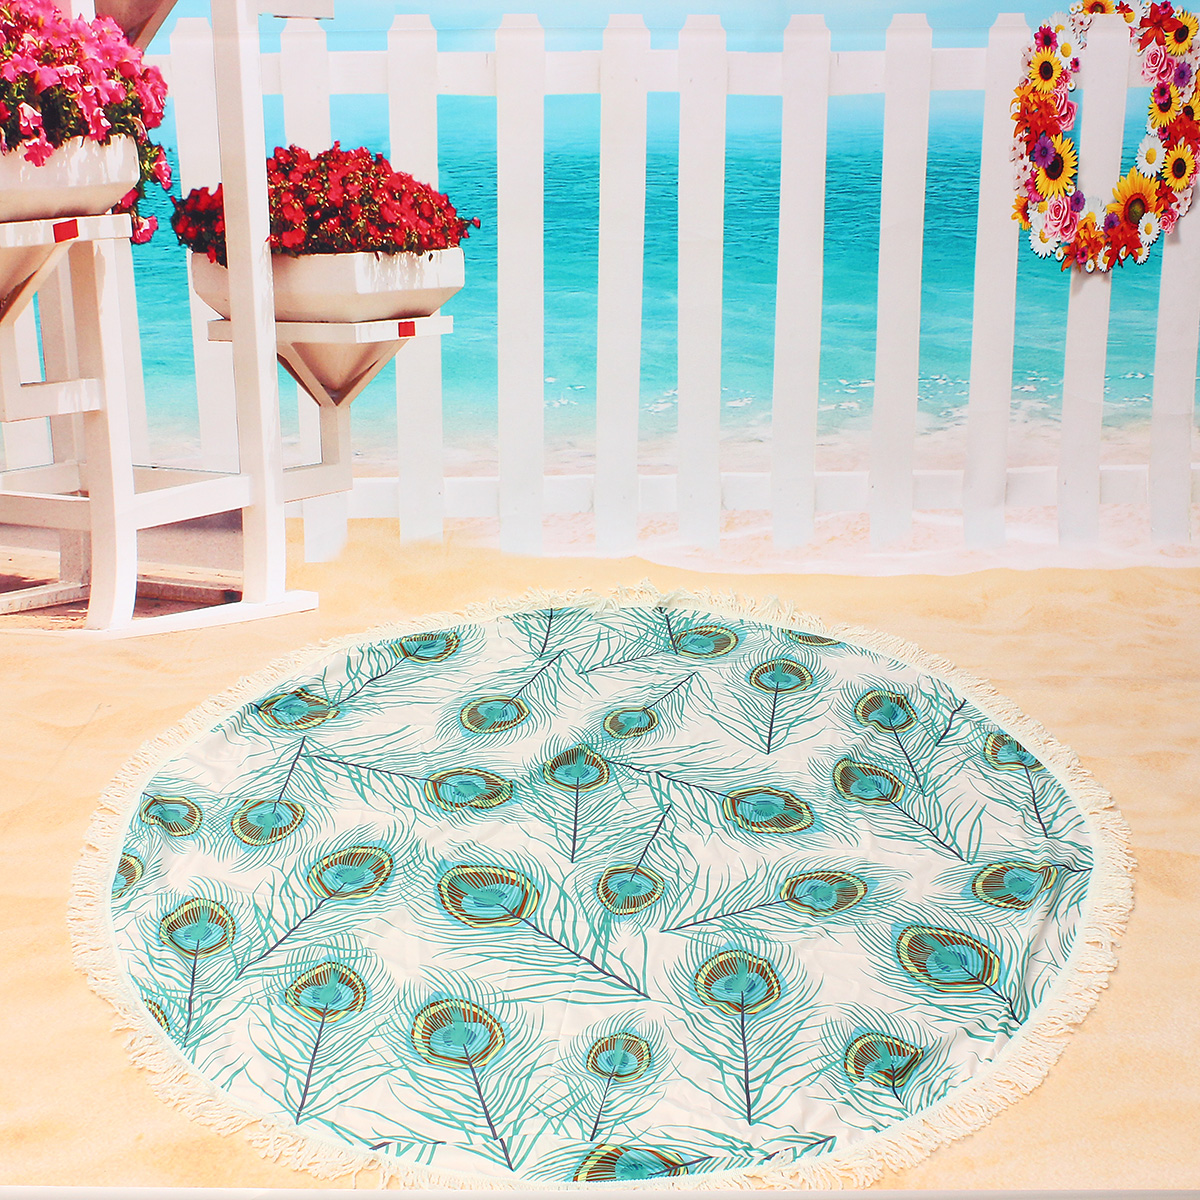 150CM-Peacock-Feather-Printed-Round-Towel-Yoga-Mat-Beach-Printing-Throw-Shawl-Wall-Hanging-Tapestry-1075860